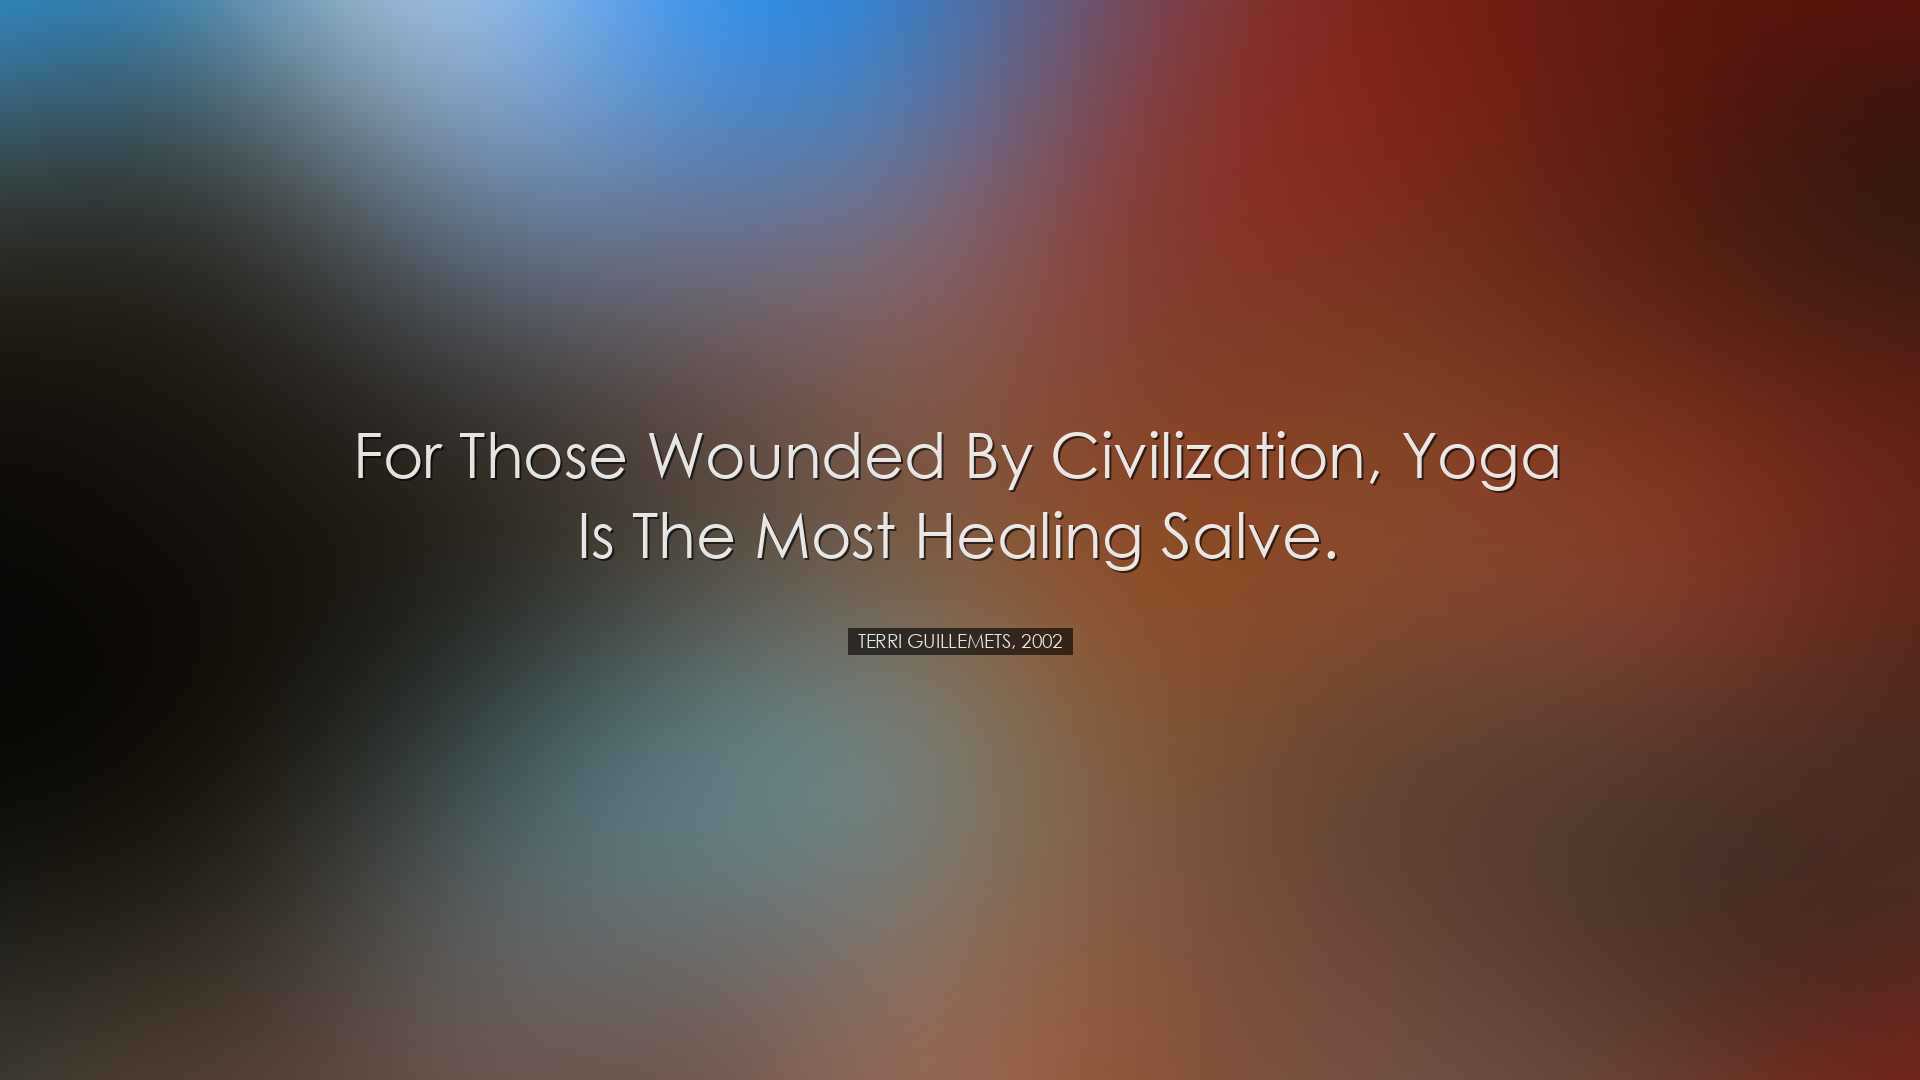 For those wounded by civilization, yoga is the most healing salve.